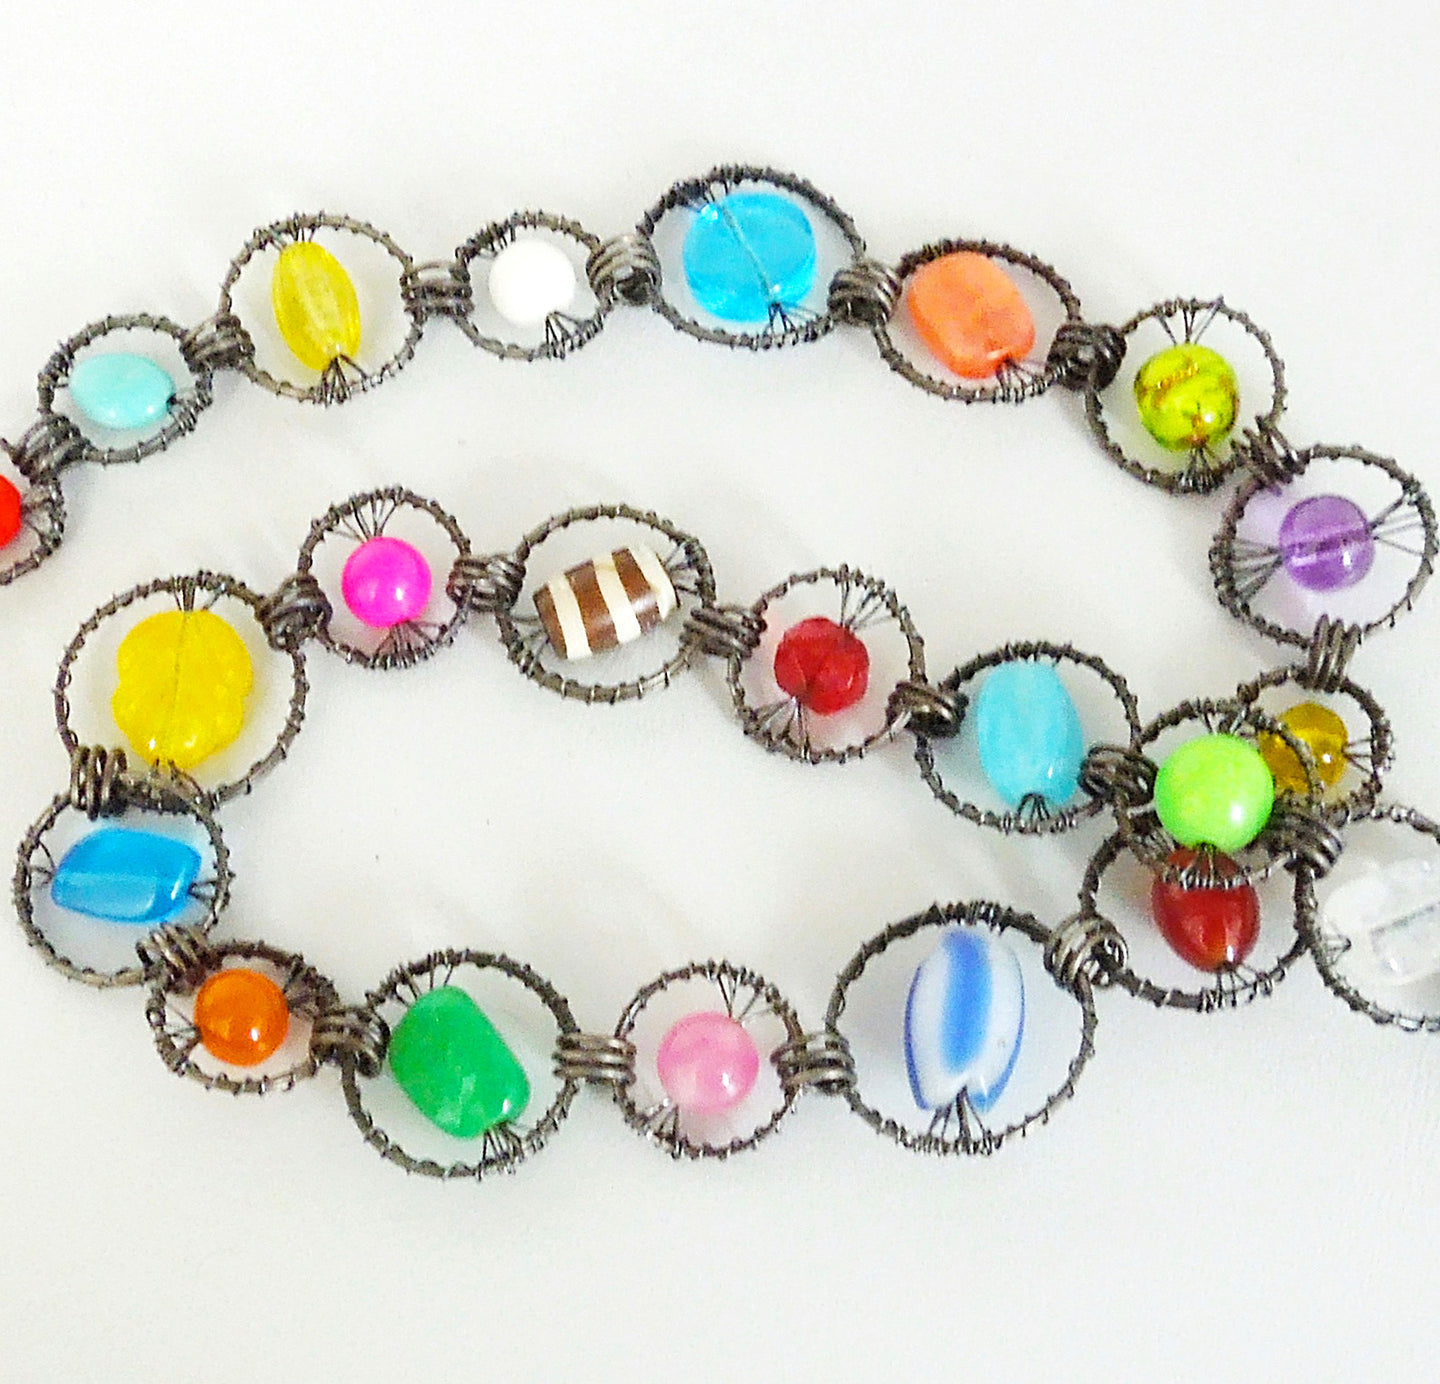 3. Circle Necklace